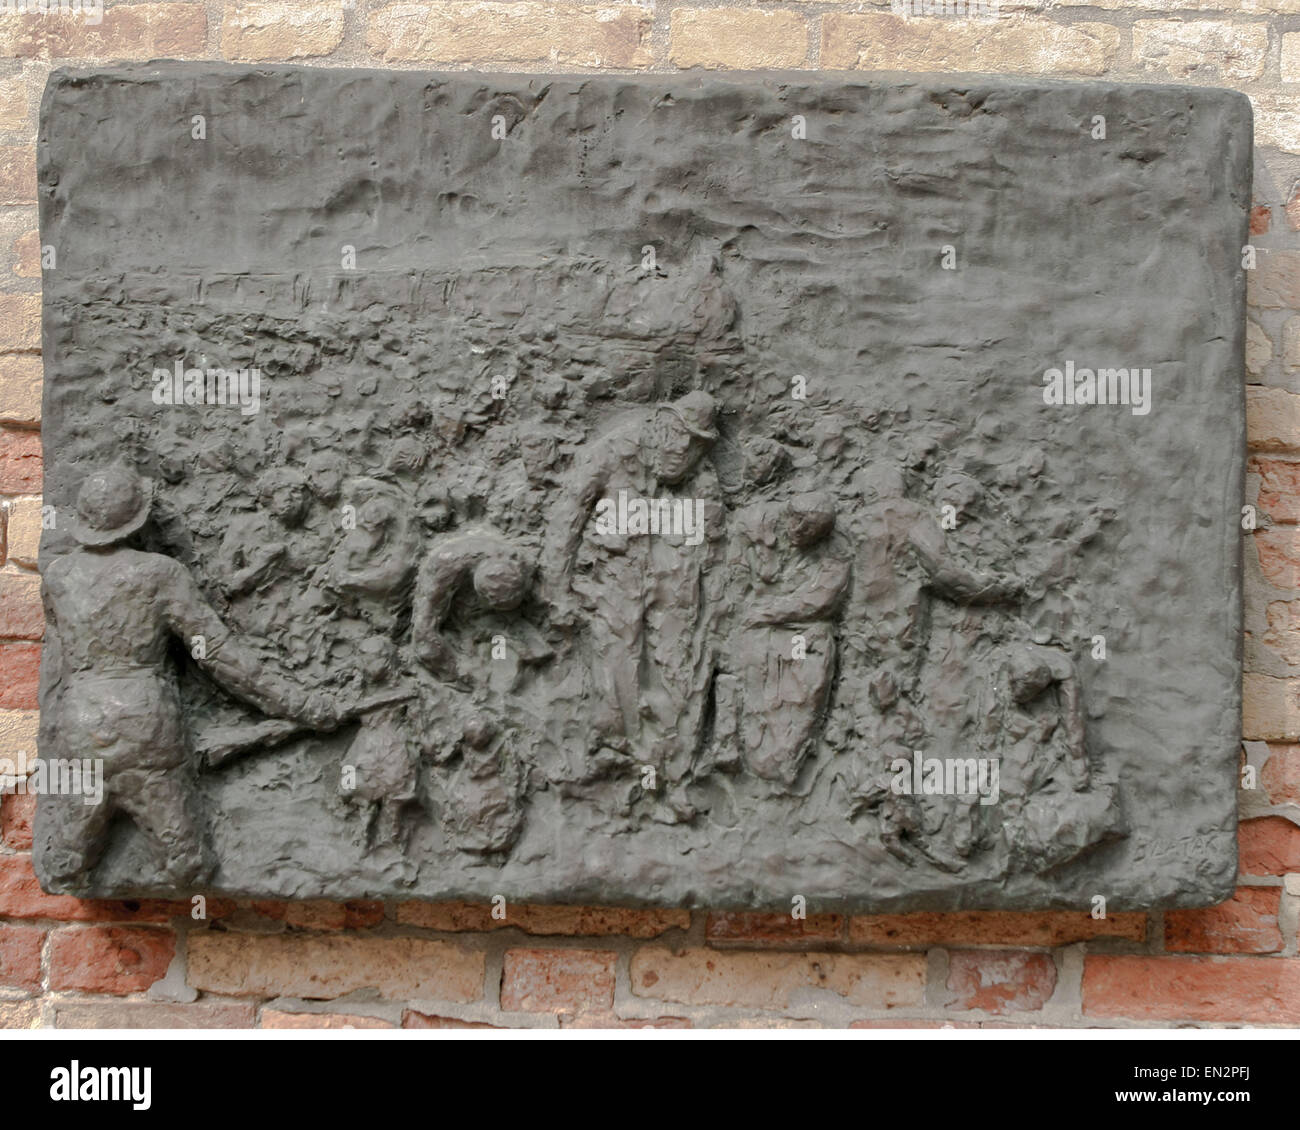 Venice, Province of Venice, ITALY. 7th Oct, 2004. A panel depicting Deportation, part of a seven-panel bronze bas-relief Holocaust memorial, on a wall of the Campo del Nuovo Ghetto by Arbit Blatas, a Lithuanian-born artist who lost his mother in the Holocaust. It commemorates the night of Dec. 5, 1943, when the first 200 of the city's Jews were rounded up and marched out for deportation and death. Venice, a UNESCO World Heritage Site, is one of the most popular international tourist destinations. © Arnold Drapkin/ZUMA Wire/Alamy Live News Stock Photo